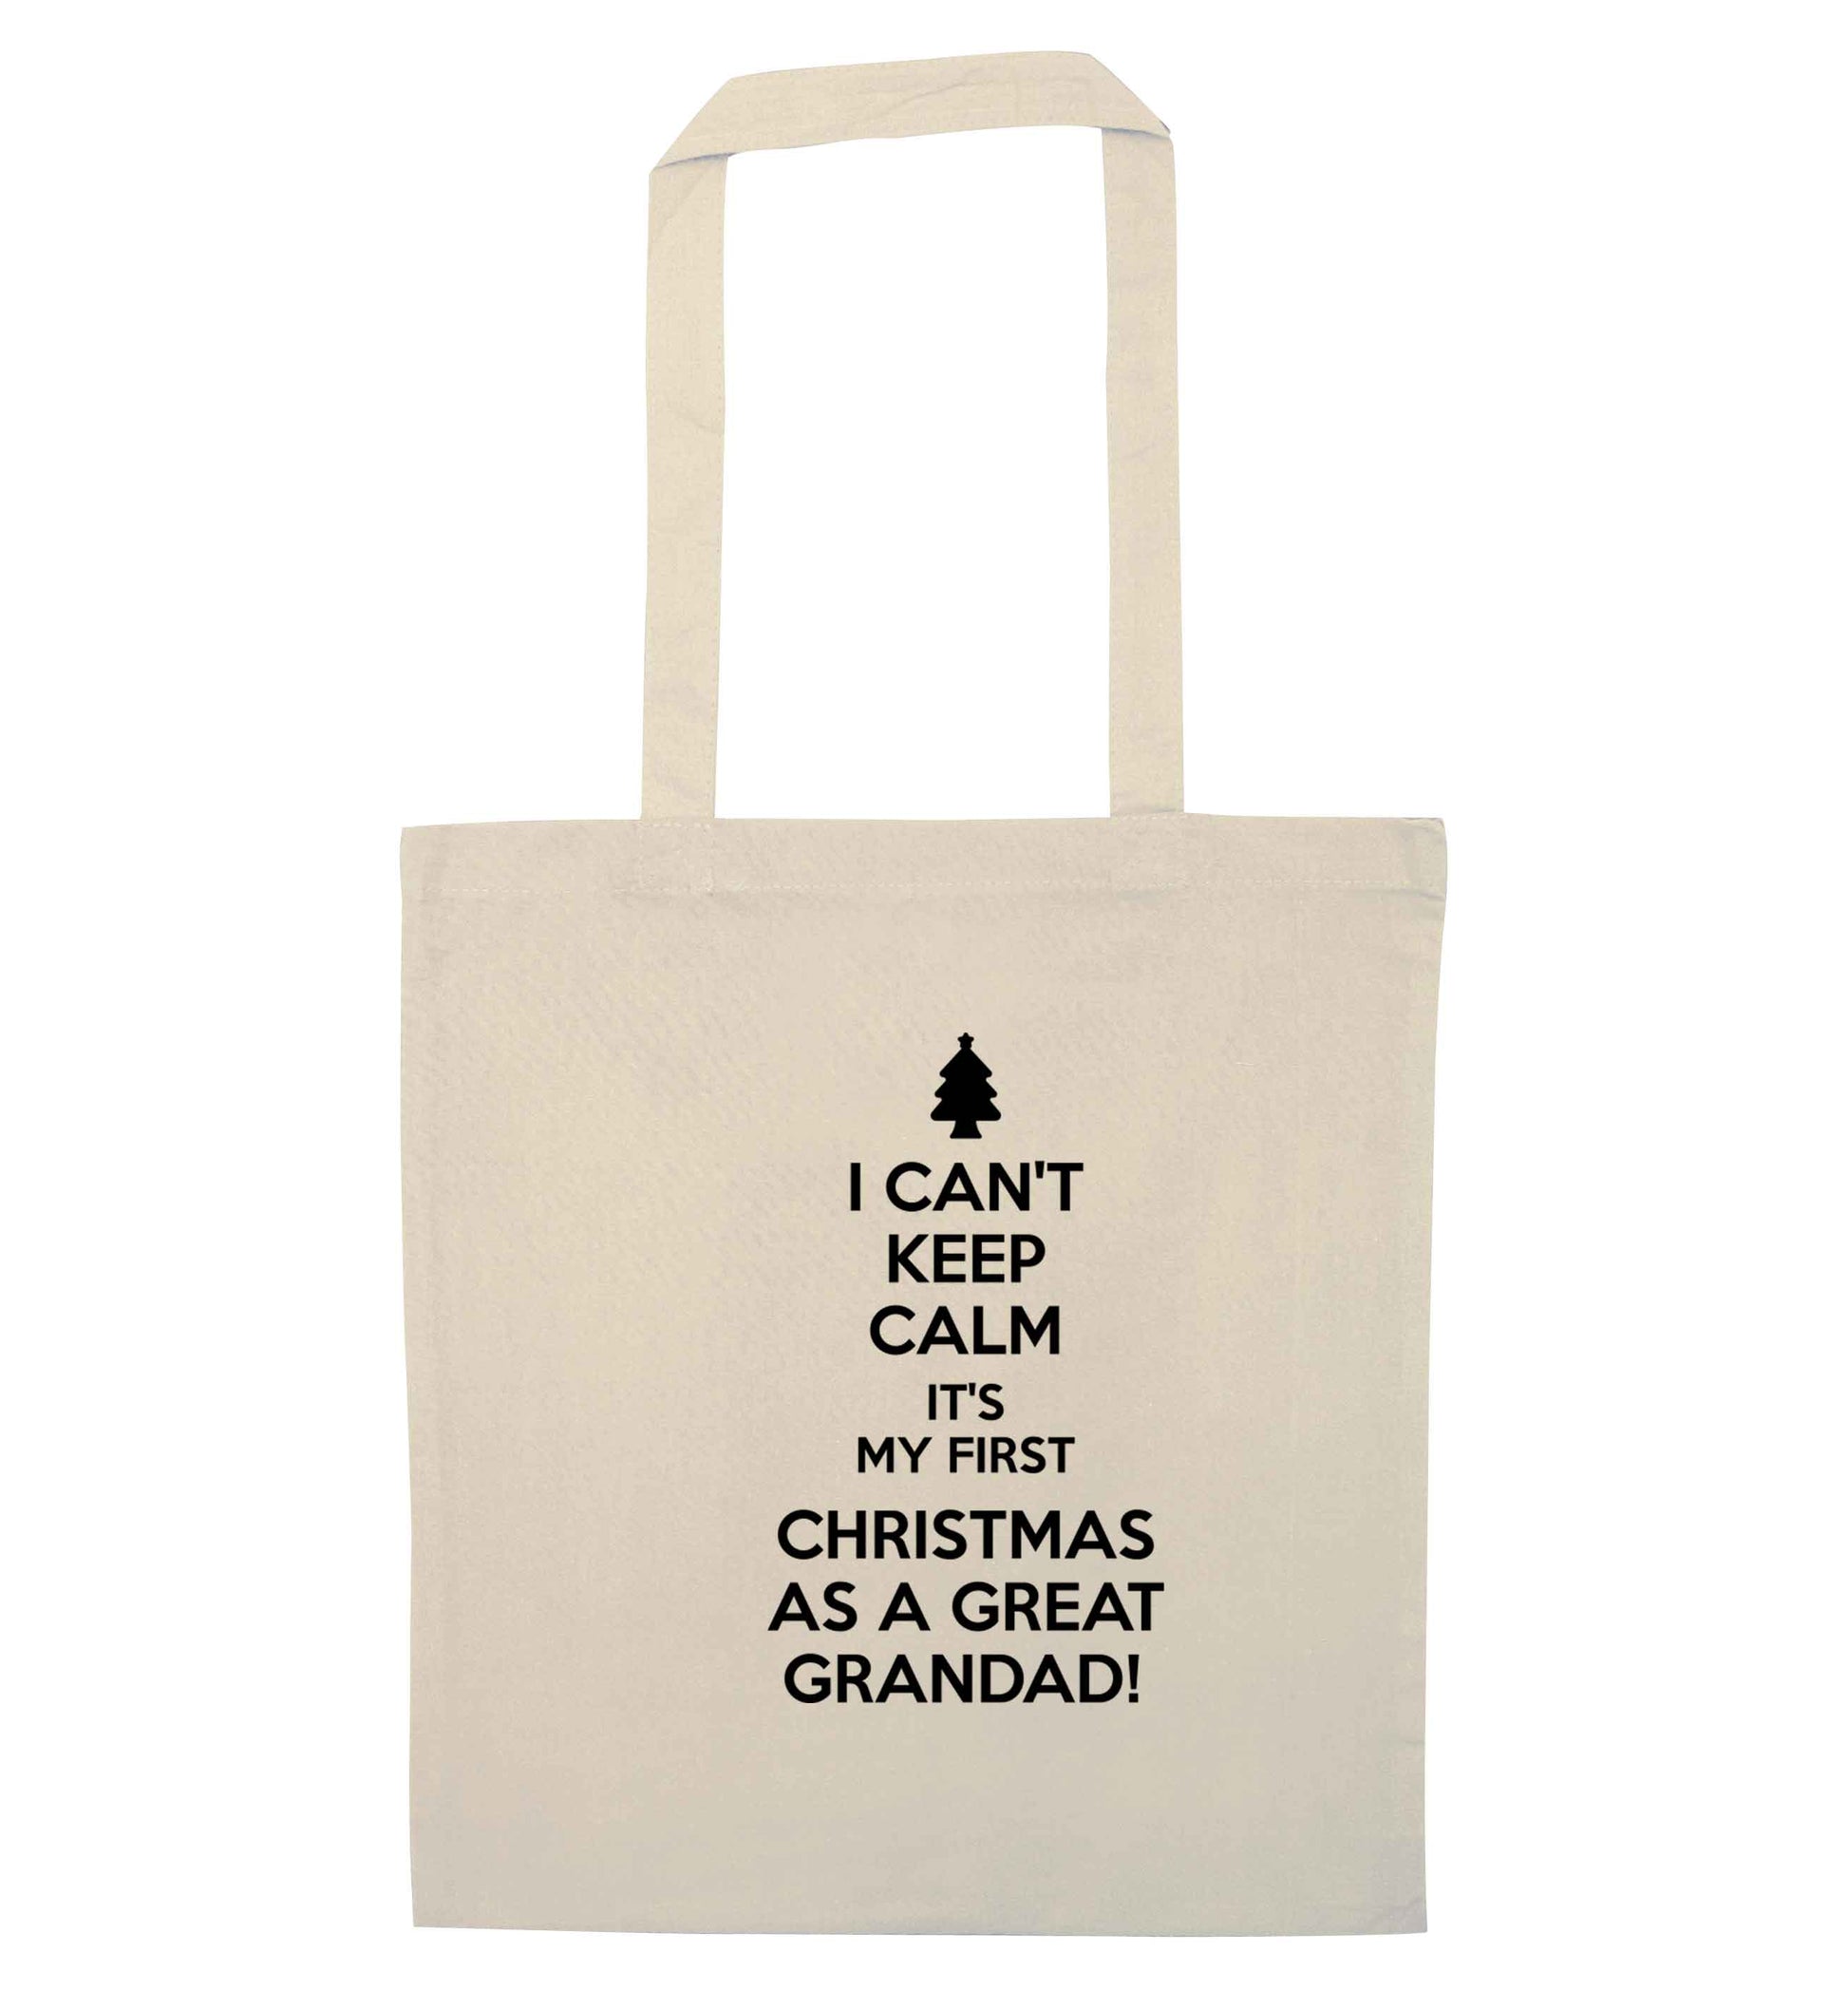 I can't keep calm it's my first Christmas as a great grandad! natural tote bag